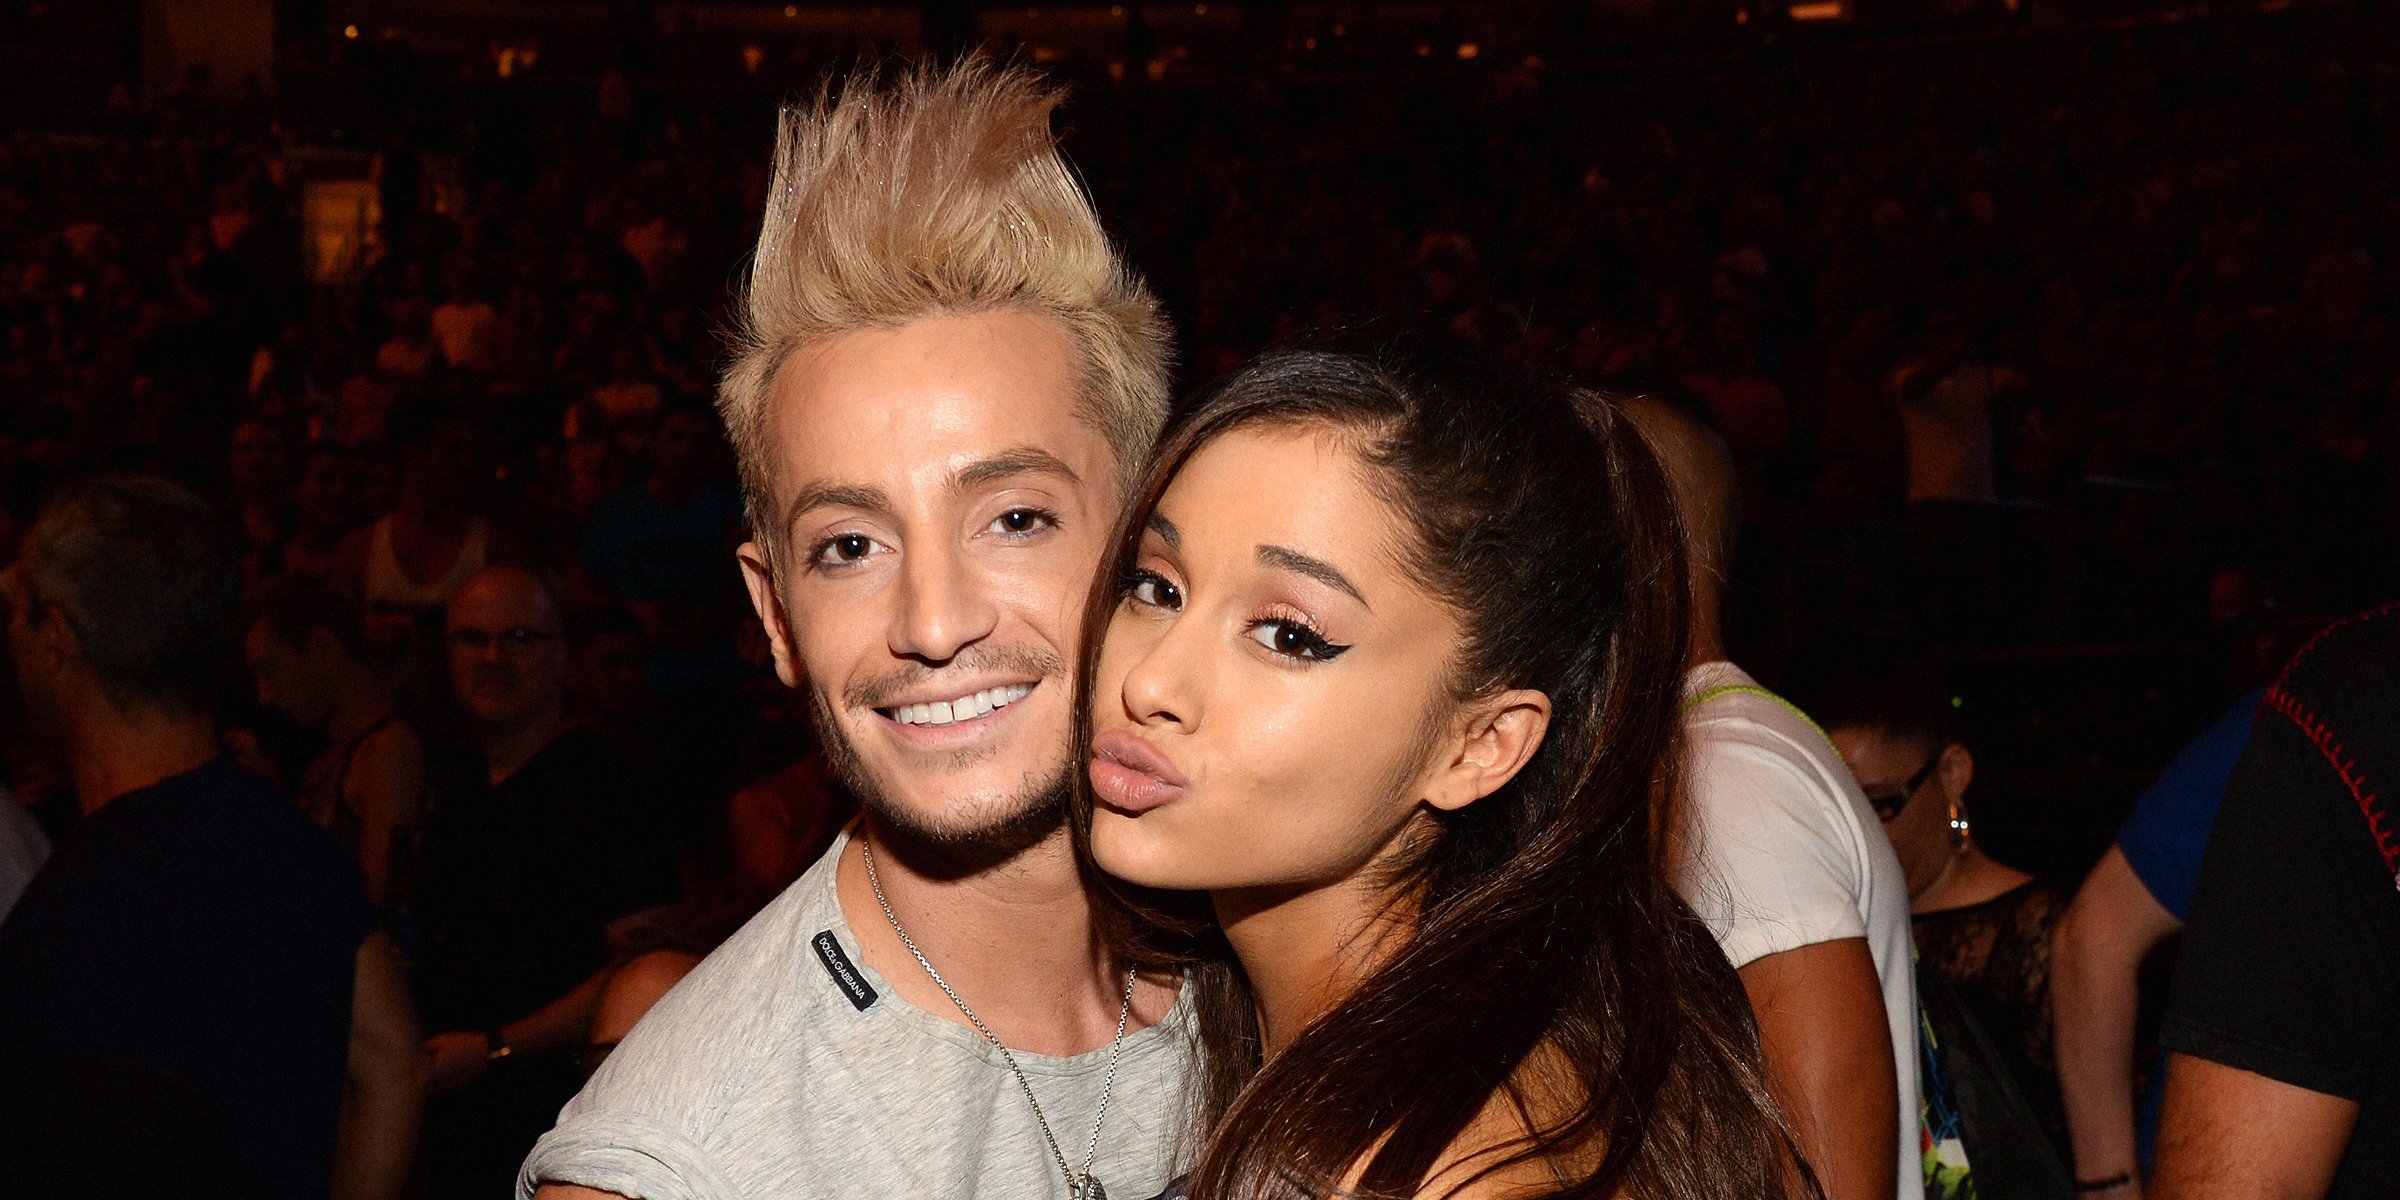 Frankie Grande and Ariana Grande. | Source: Getty Images